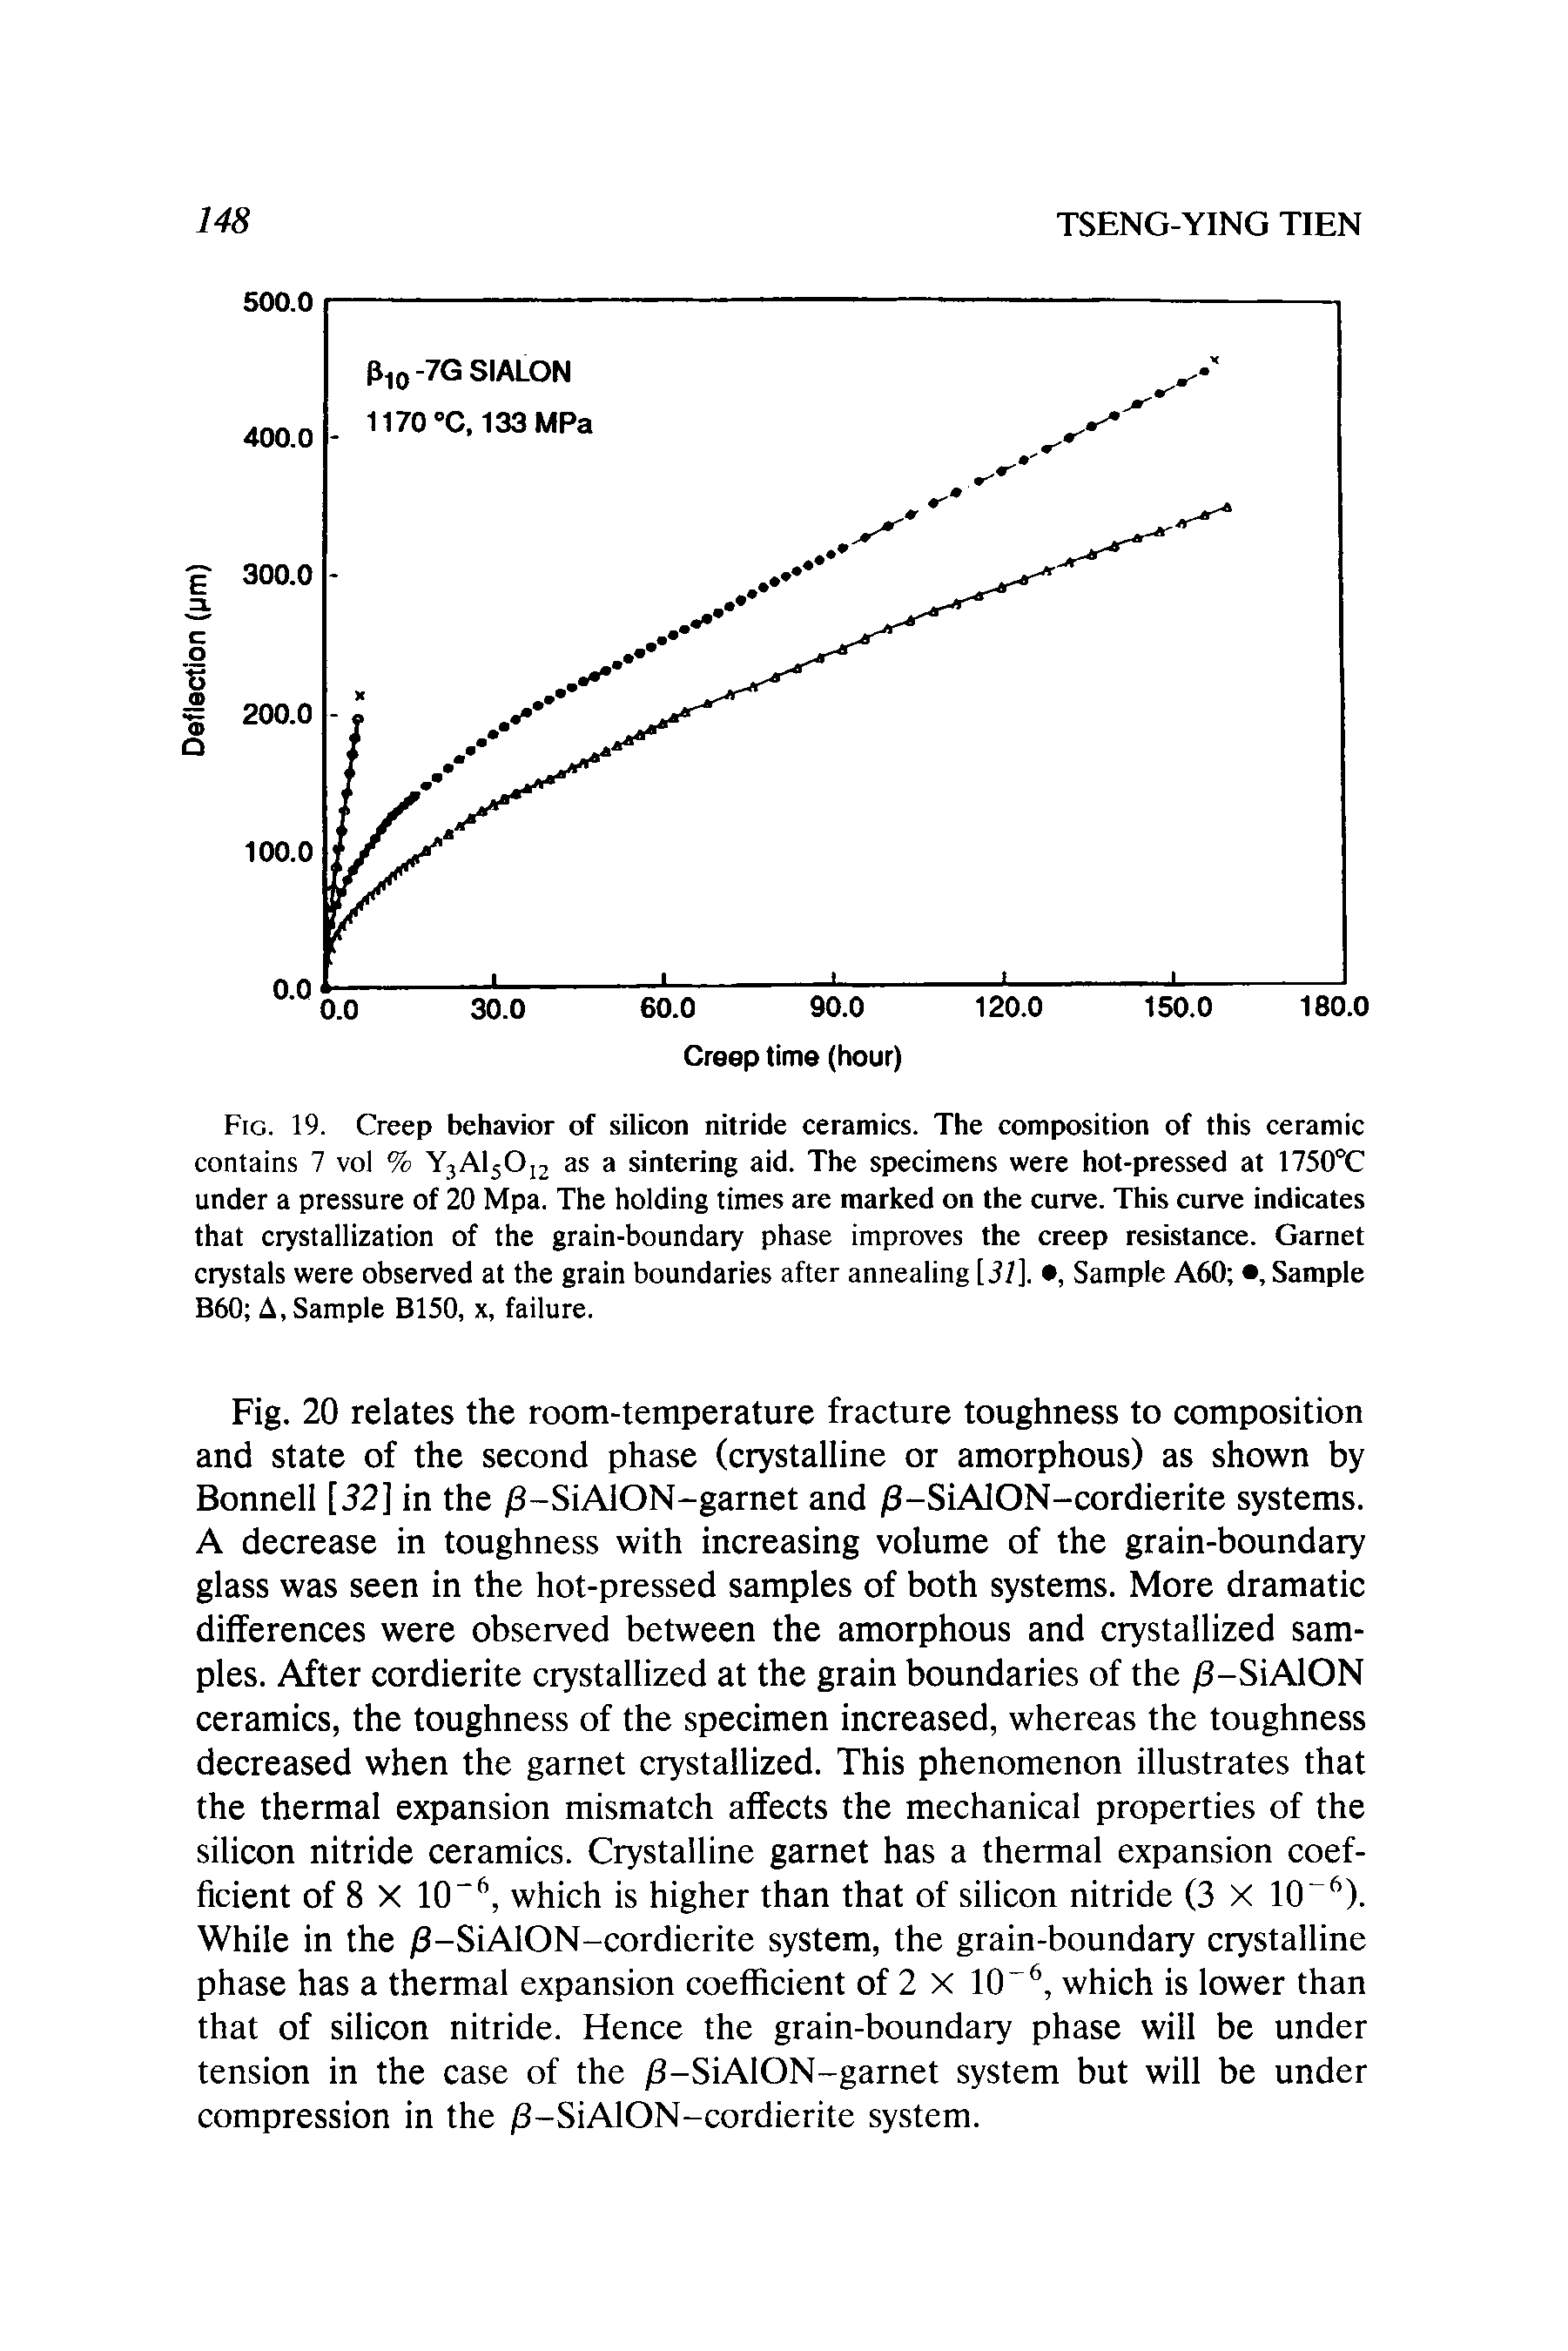 Fig. 19. Creep behavior of silicon nitride ceramics. The composition of this ceramic contains 7 vol % Y3A15Oi2 as a sintering aid. The specimens were hot-pressed at 1750°C under a pressure of 20 Mpa. The holding times are marked on the curve. This curve indicates that crystallization of the grain-boundary phase improves the creep resistance. Garnet crystals were observed at the grain boundaries after annealing [3/]. , Sample A60 , Sample B60 A, Sample B150, x, failure.